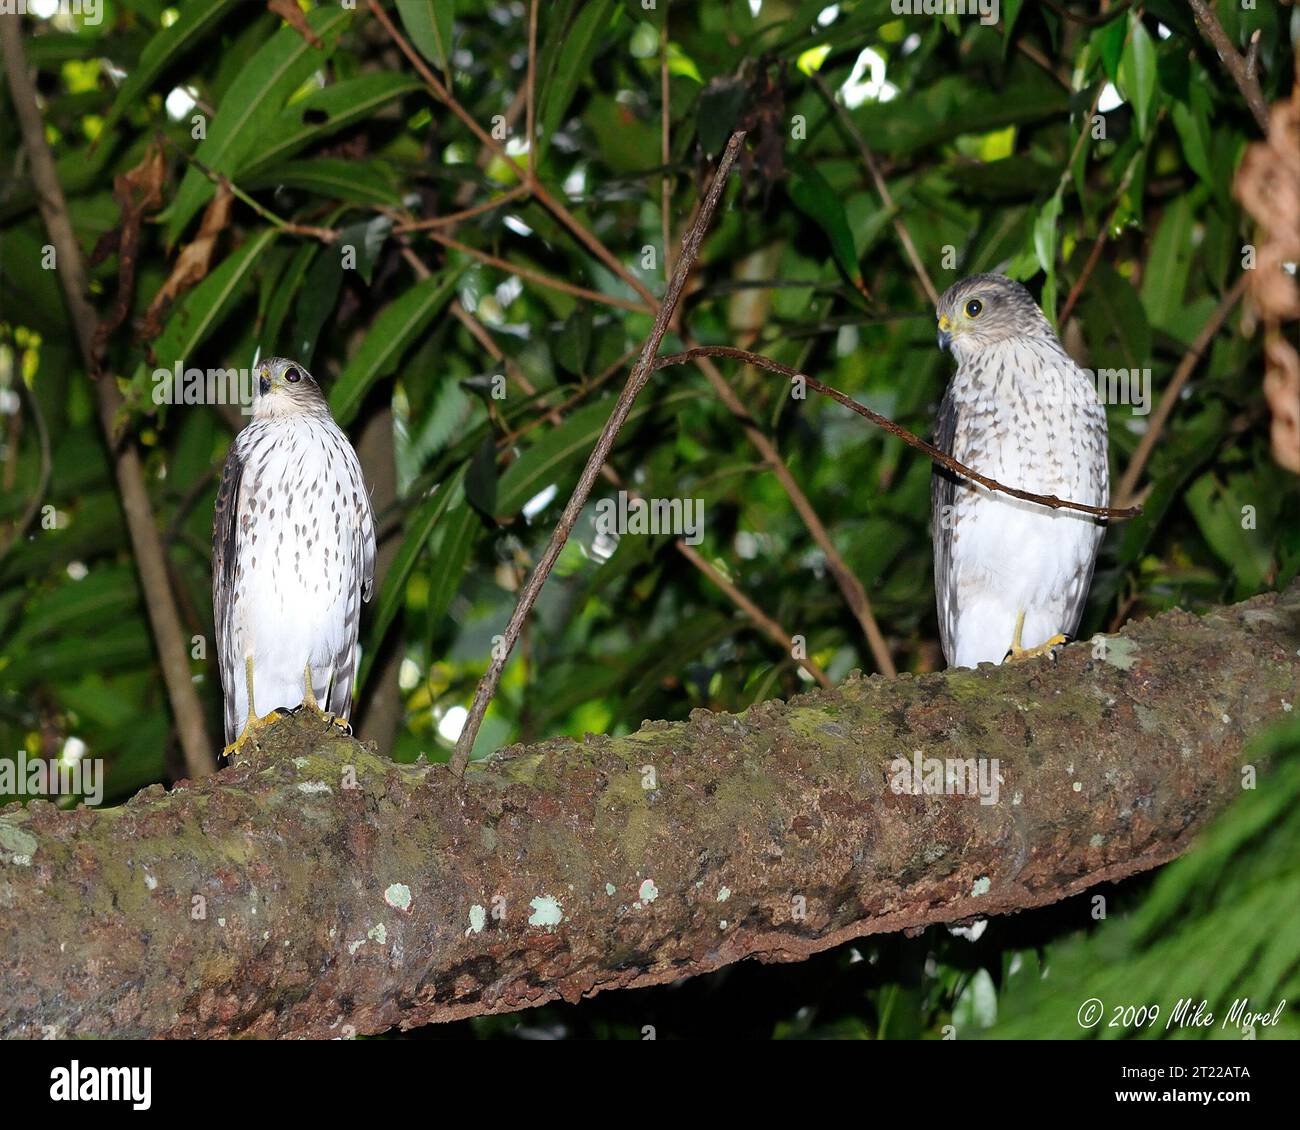 Two hawks sitting on a tree branch. Subjects: Endangered species; birds; raptors. Location: Puerto Rico. Fish and Wildlife Service Site: CARIBBEAN ISLANDS REFUGES.   Collection: Wildlife and Endangered Species.. 1998 - 2011. Stock Photo